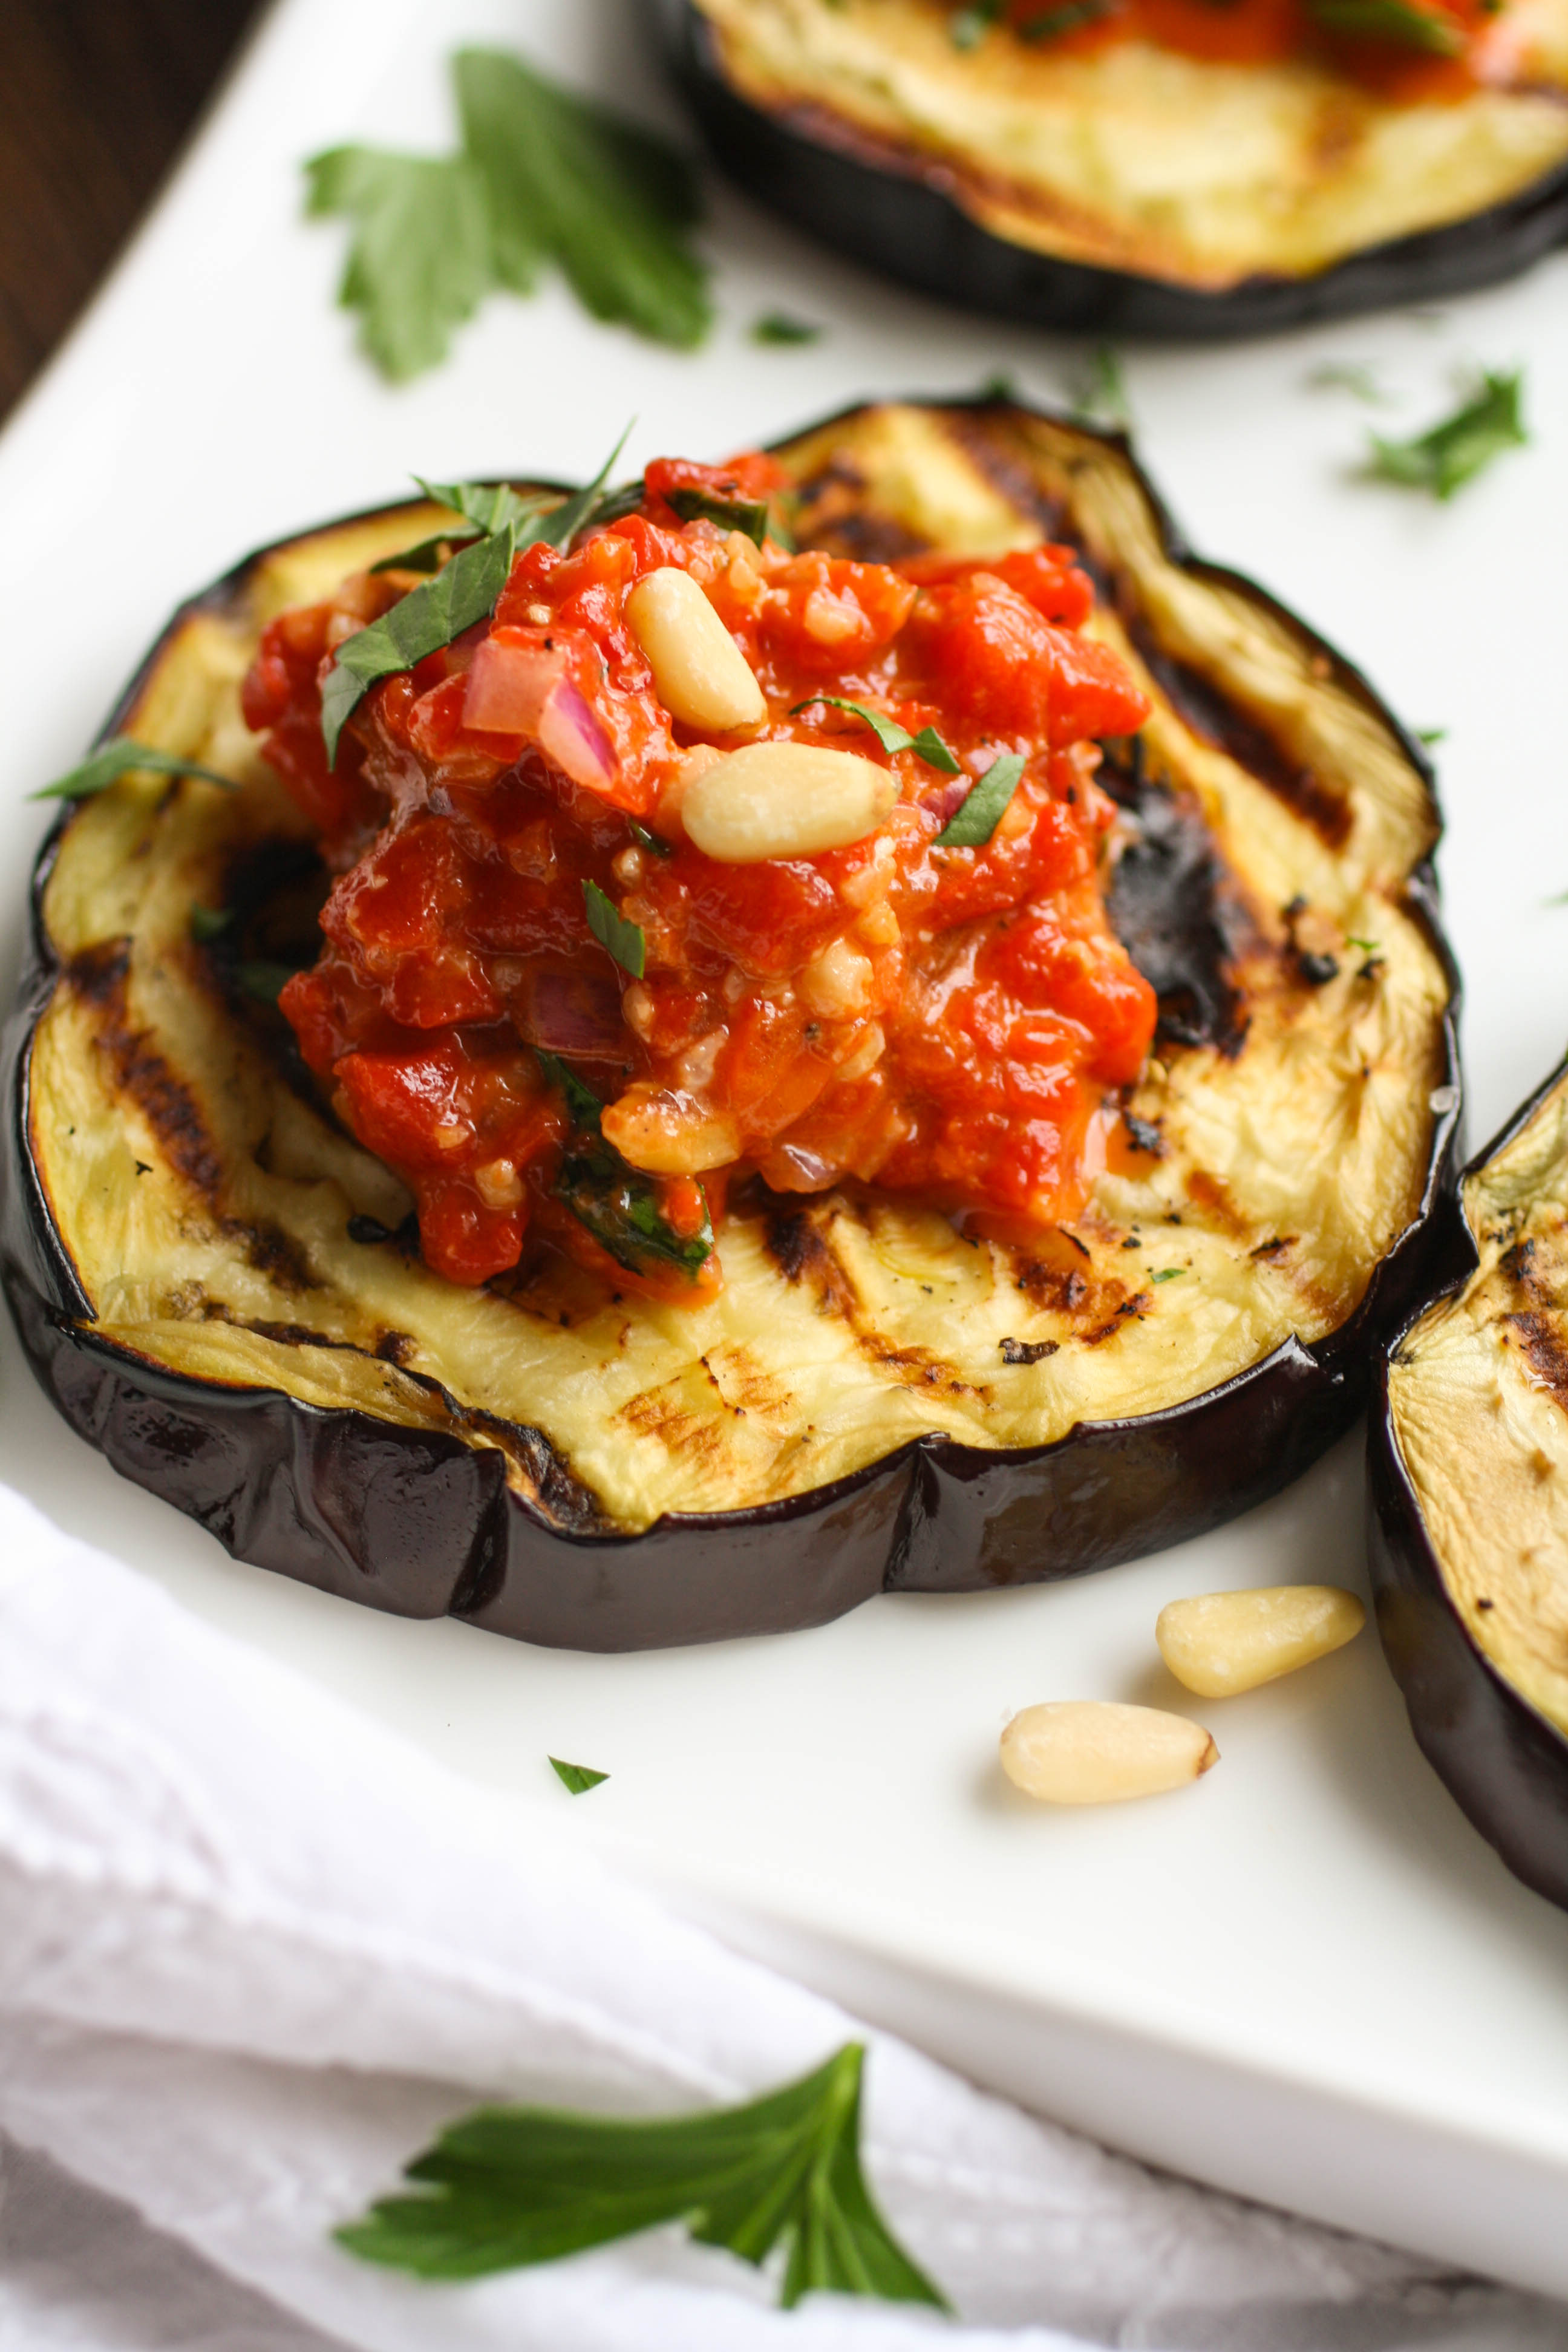 Grilled Eggplant with Roasted Red Pepper Tapenade is a great summer dish. You'll love how easy it is to make, and how delicious it is!